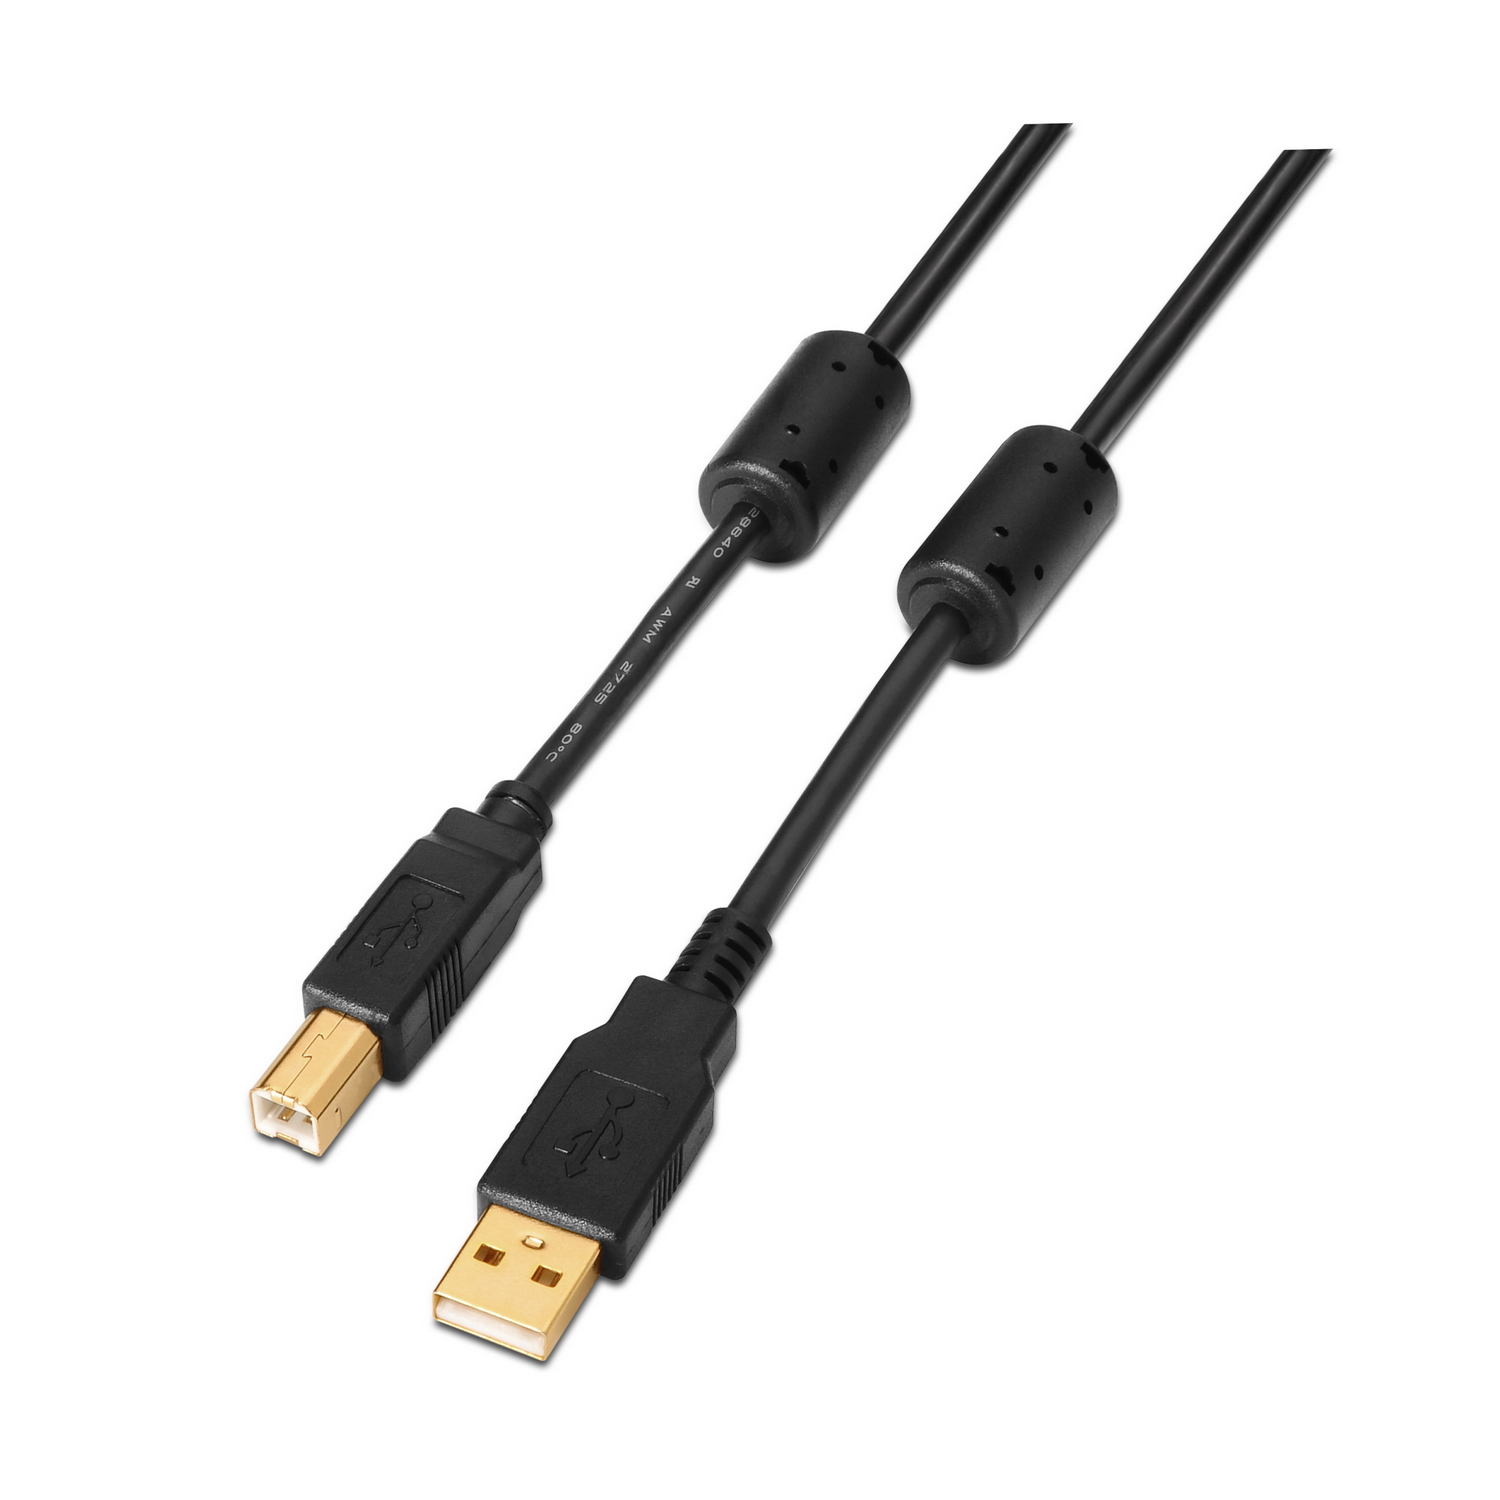 Cable USB type AB 5 m. cable USB imprimante